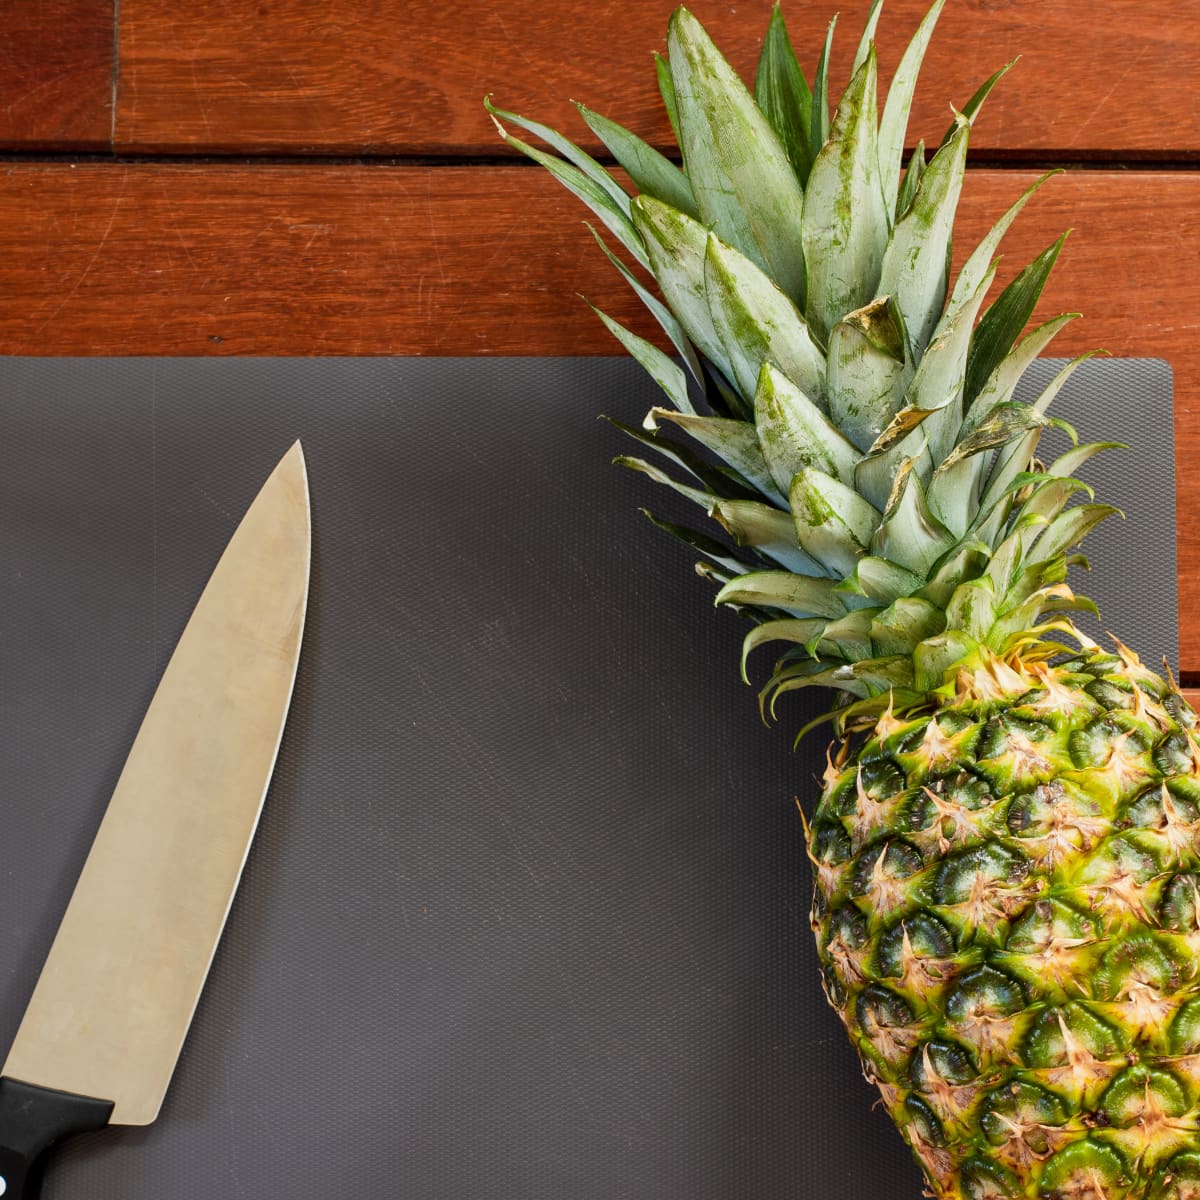 Pineapple Cutting Board with Fruit & Nuts